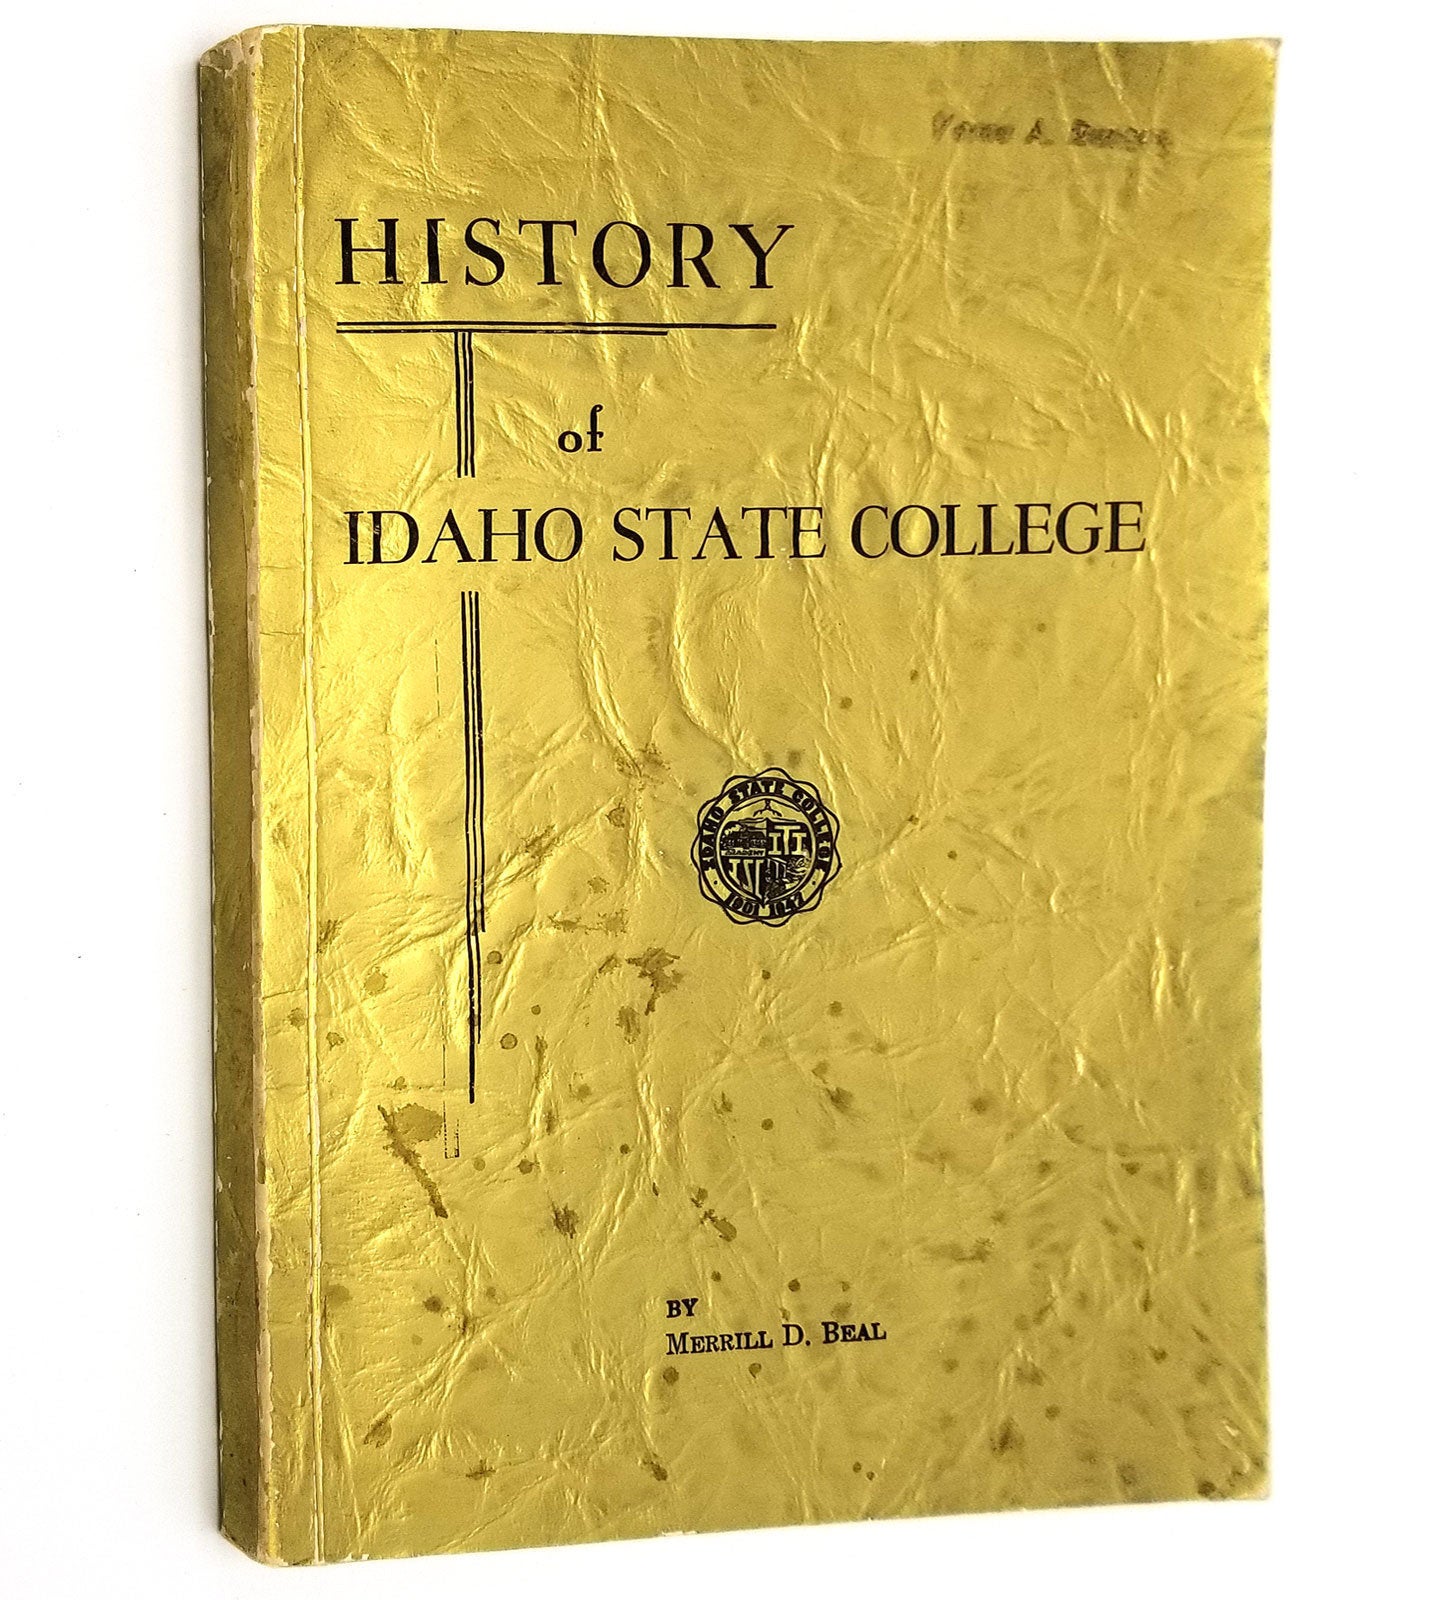 History of Idaho State College (book cover)